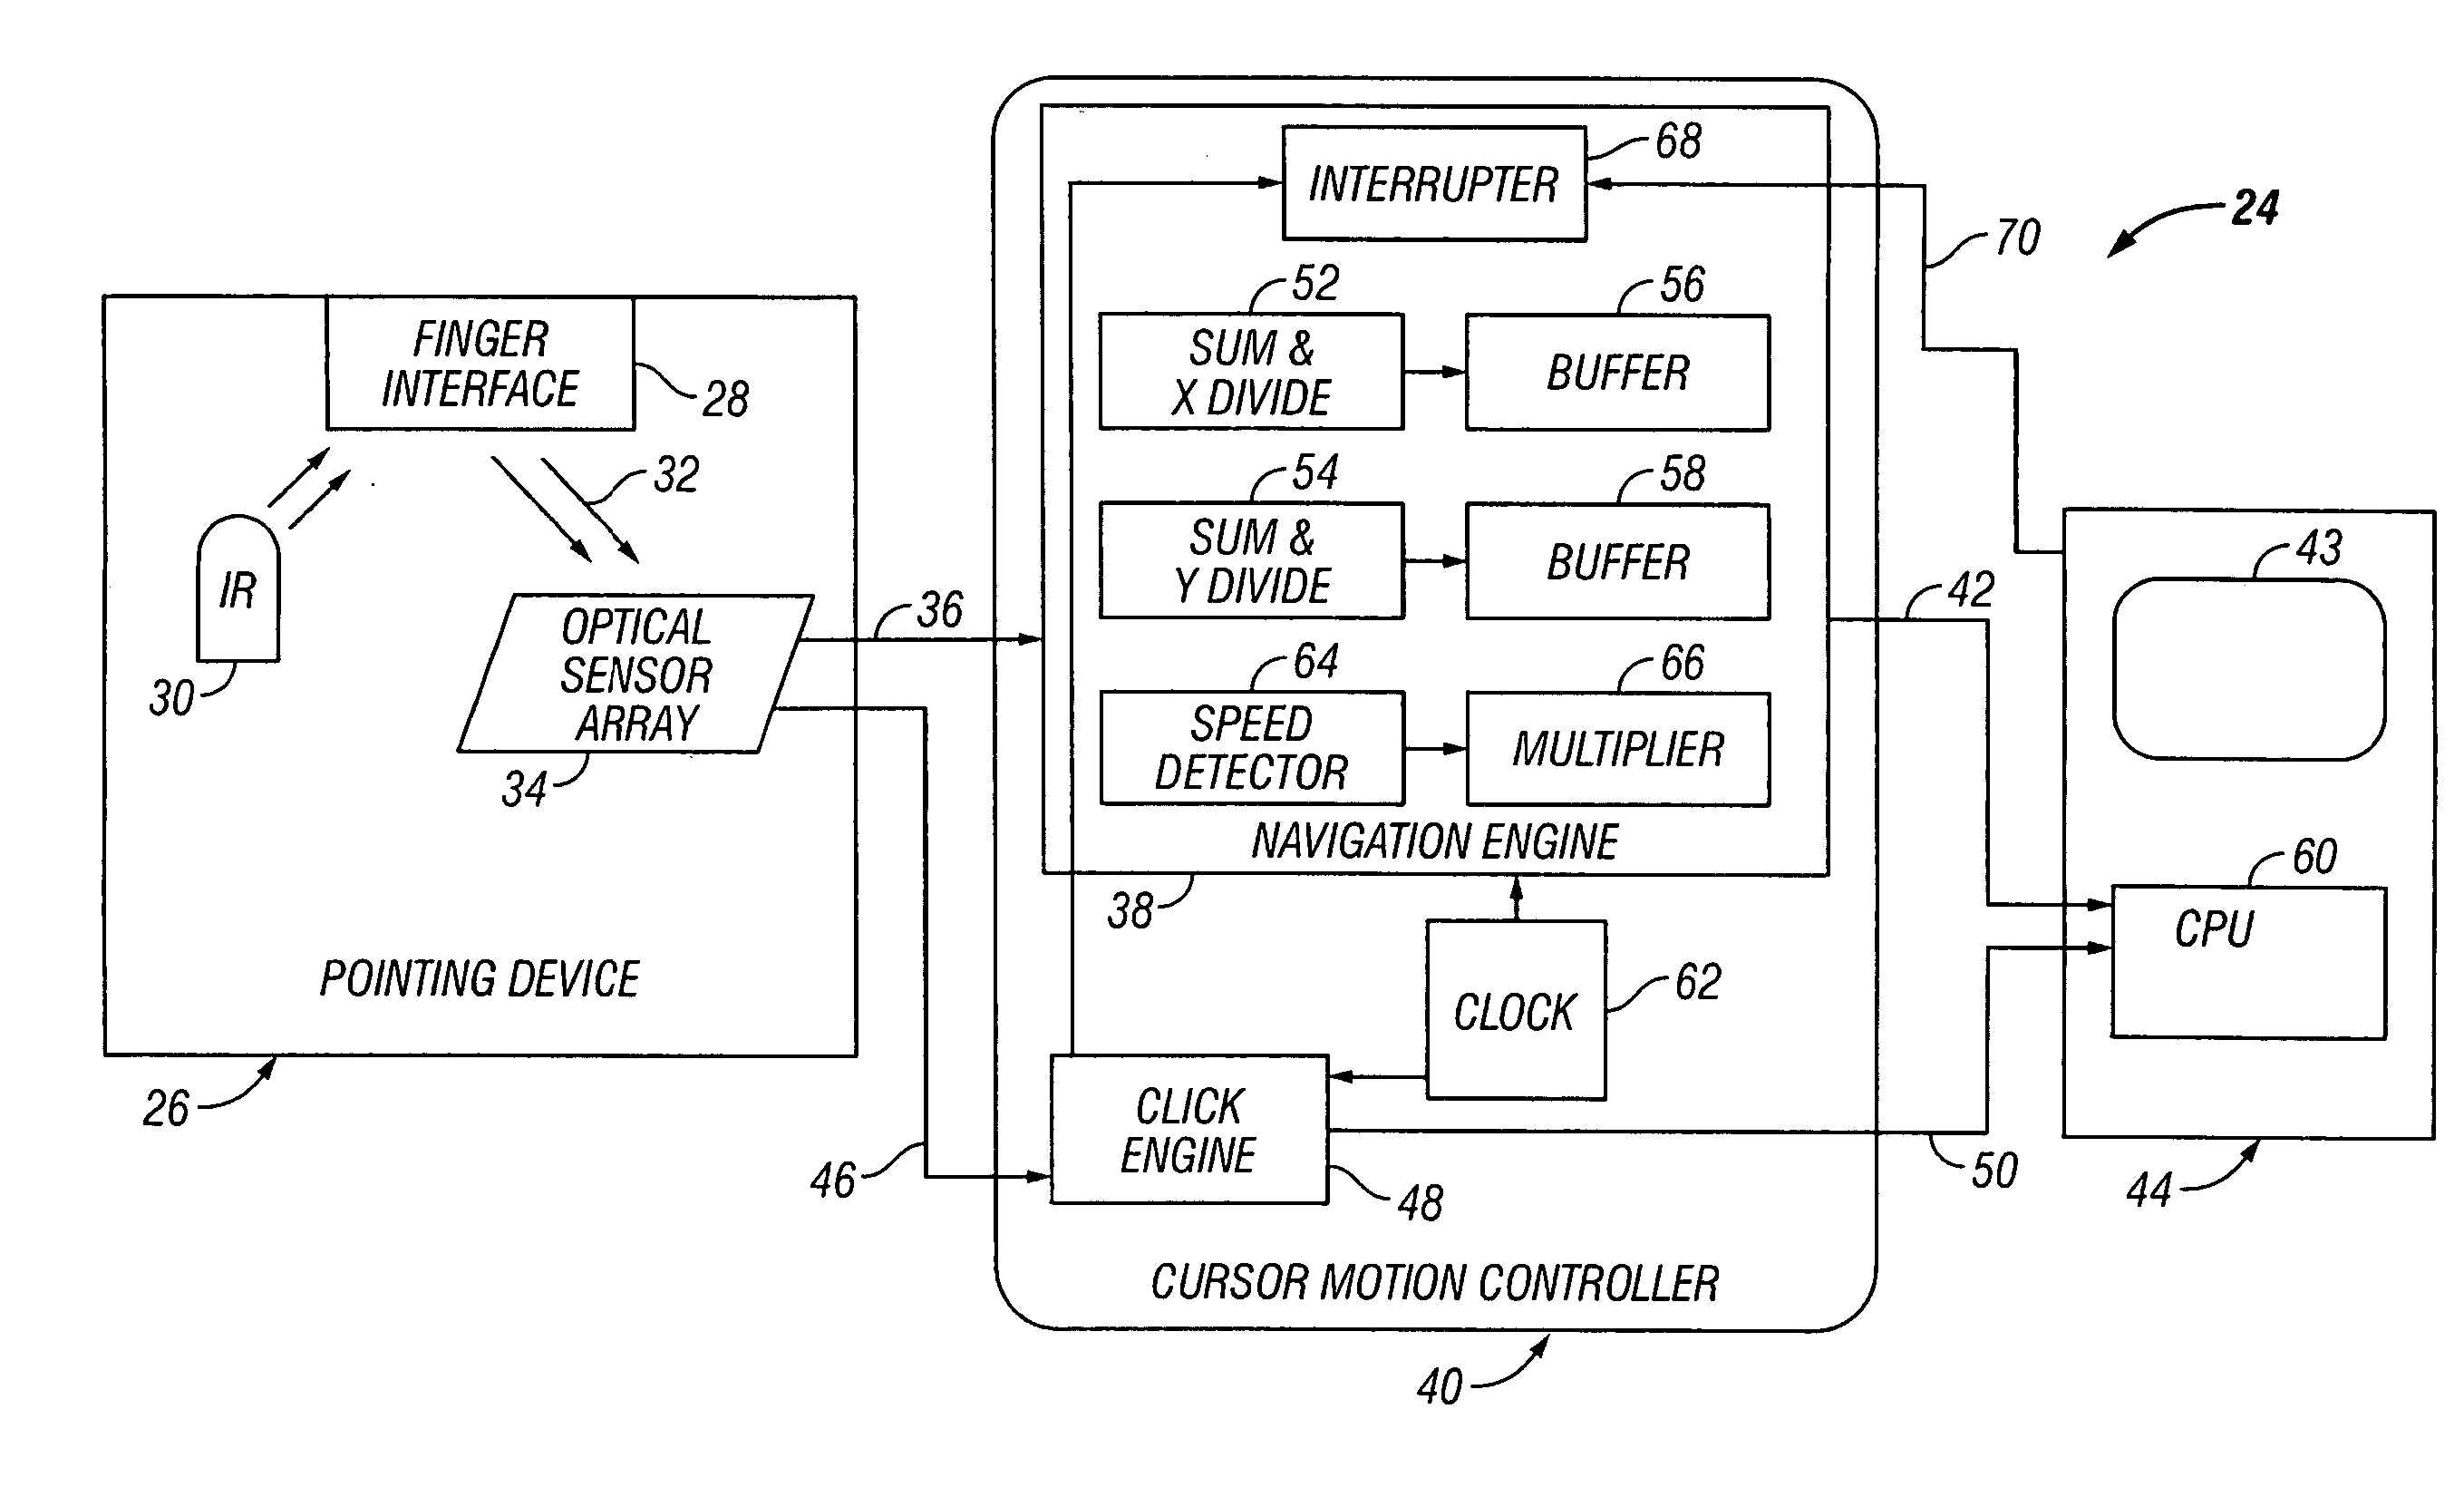 Cursor motion control of a pointing device